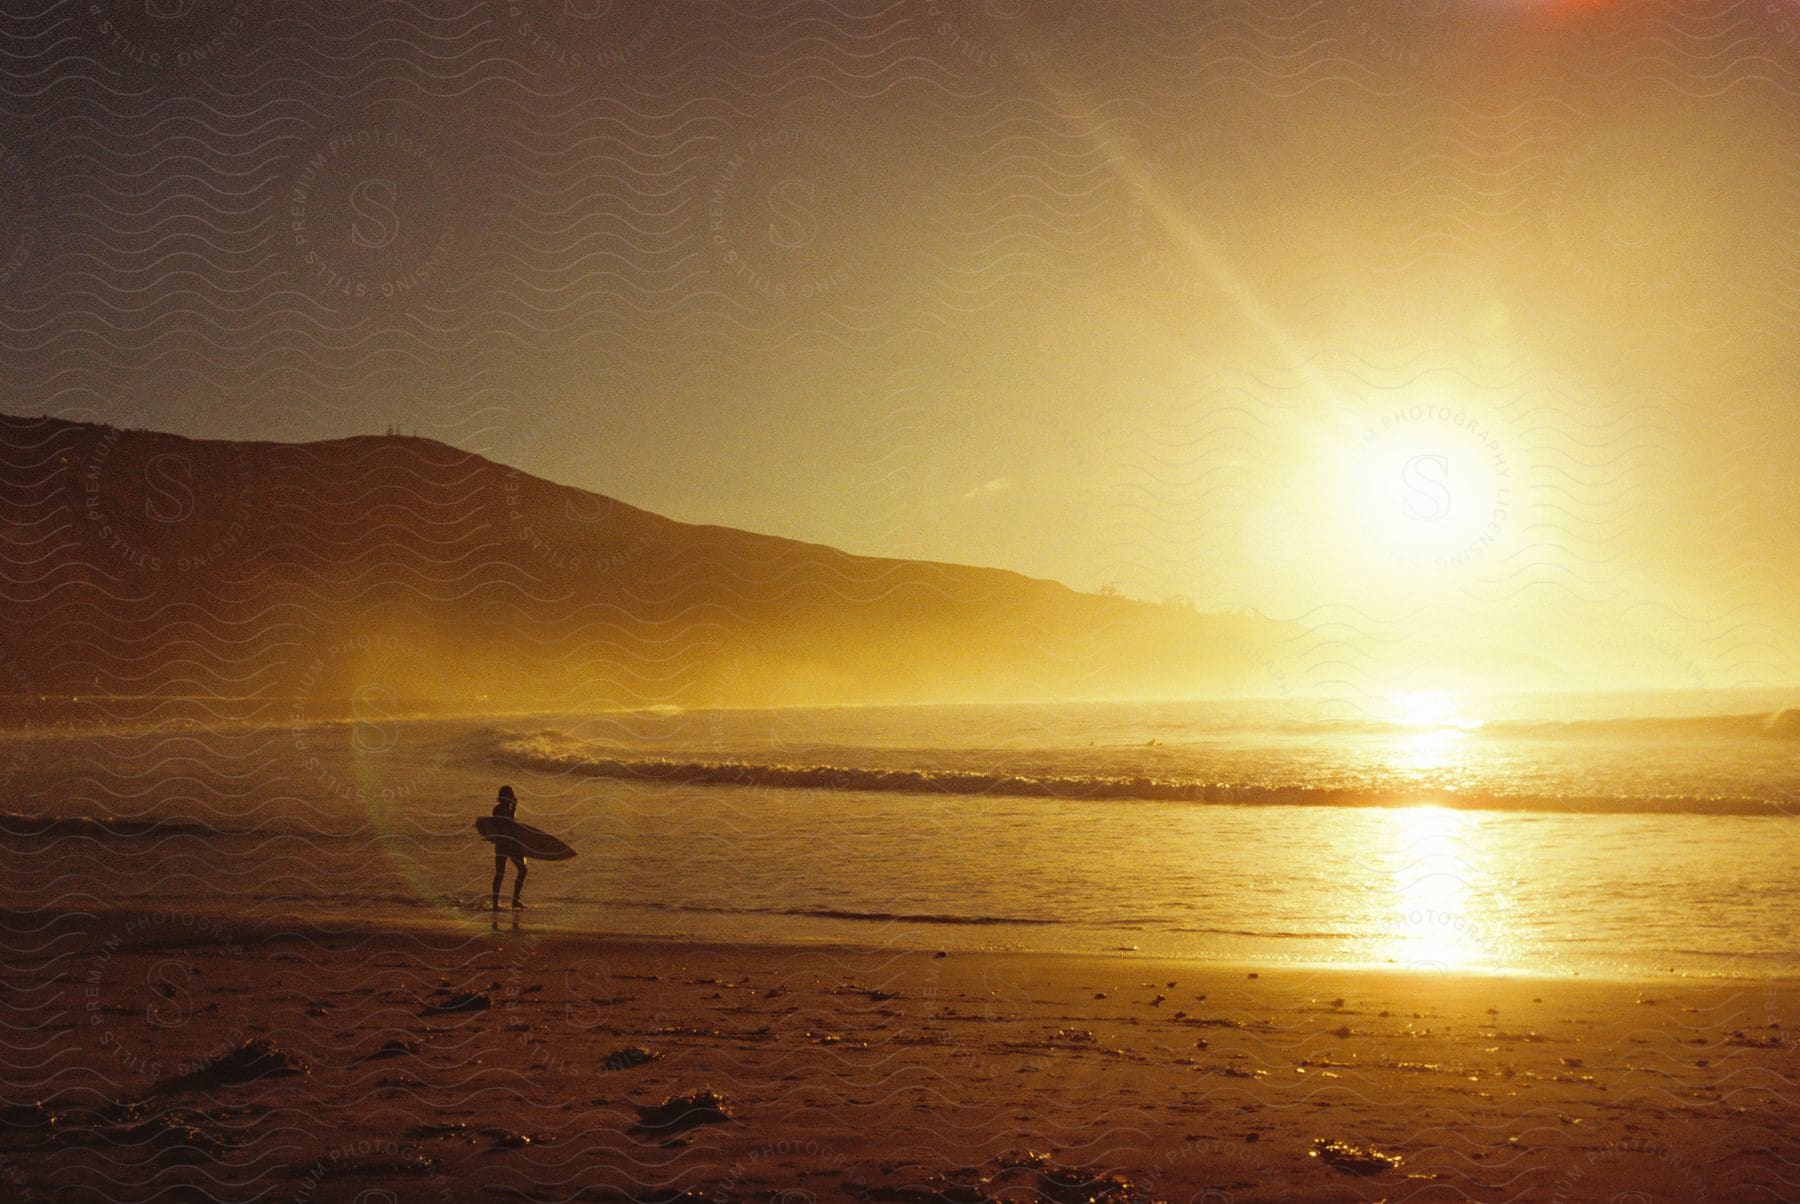 A person walks along the shoreline at dusk with a mountain in the background and a surfboard in hand